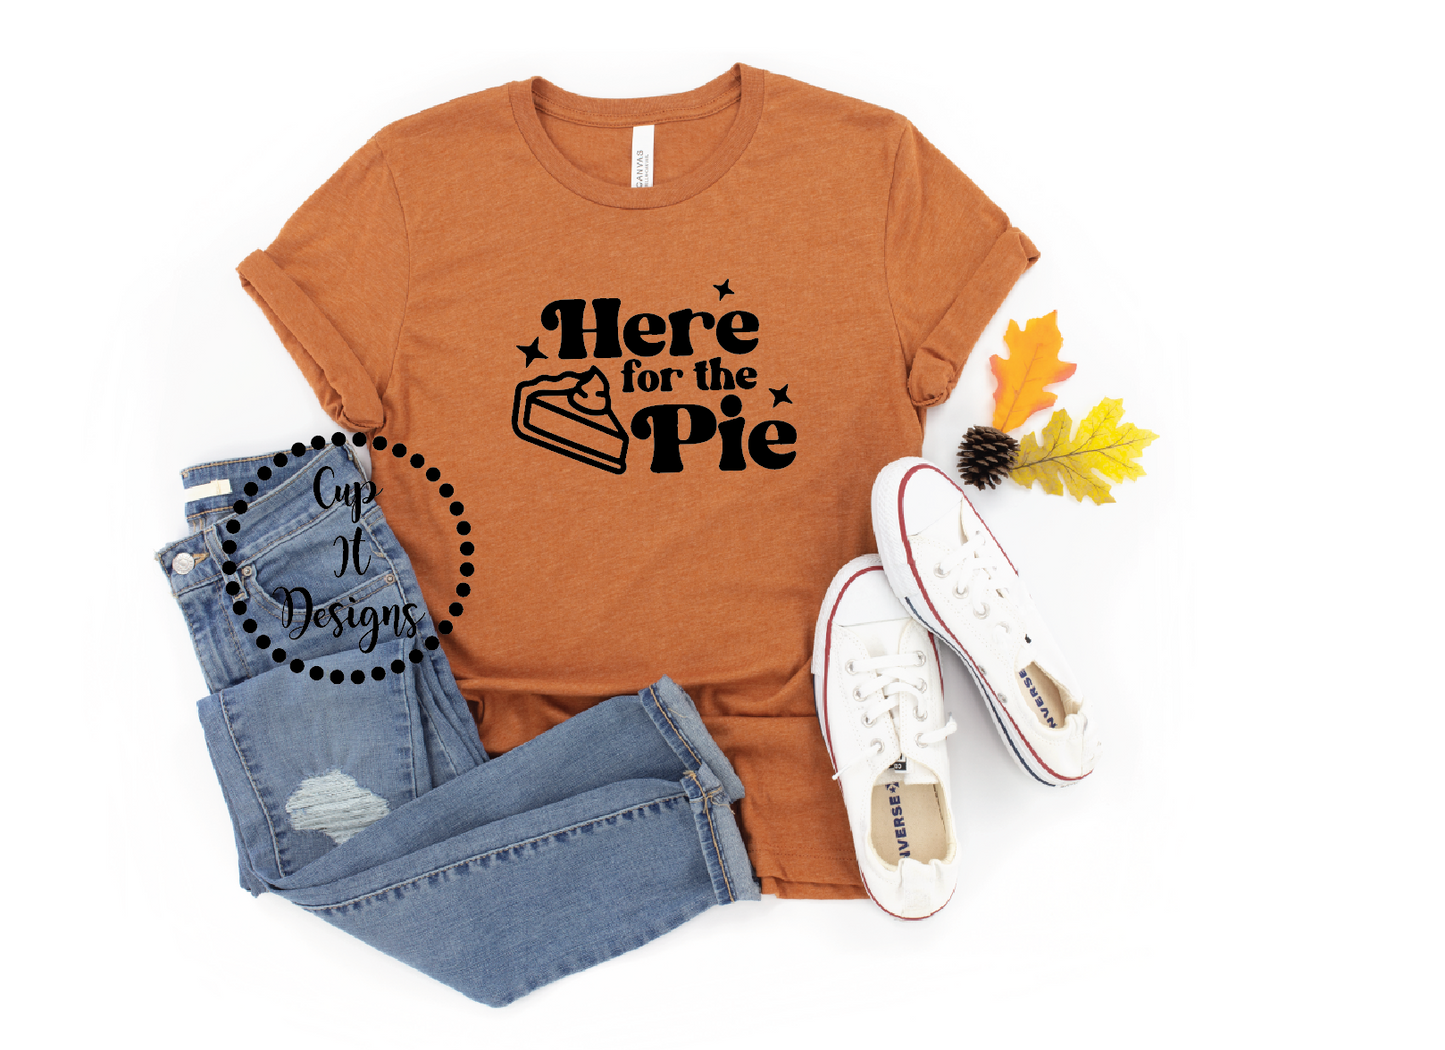 Here for the Pie Tee